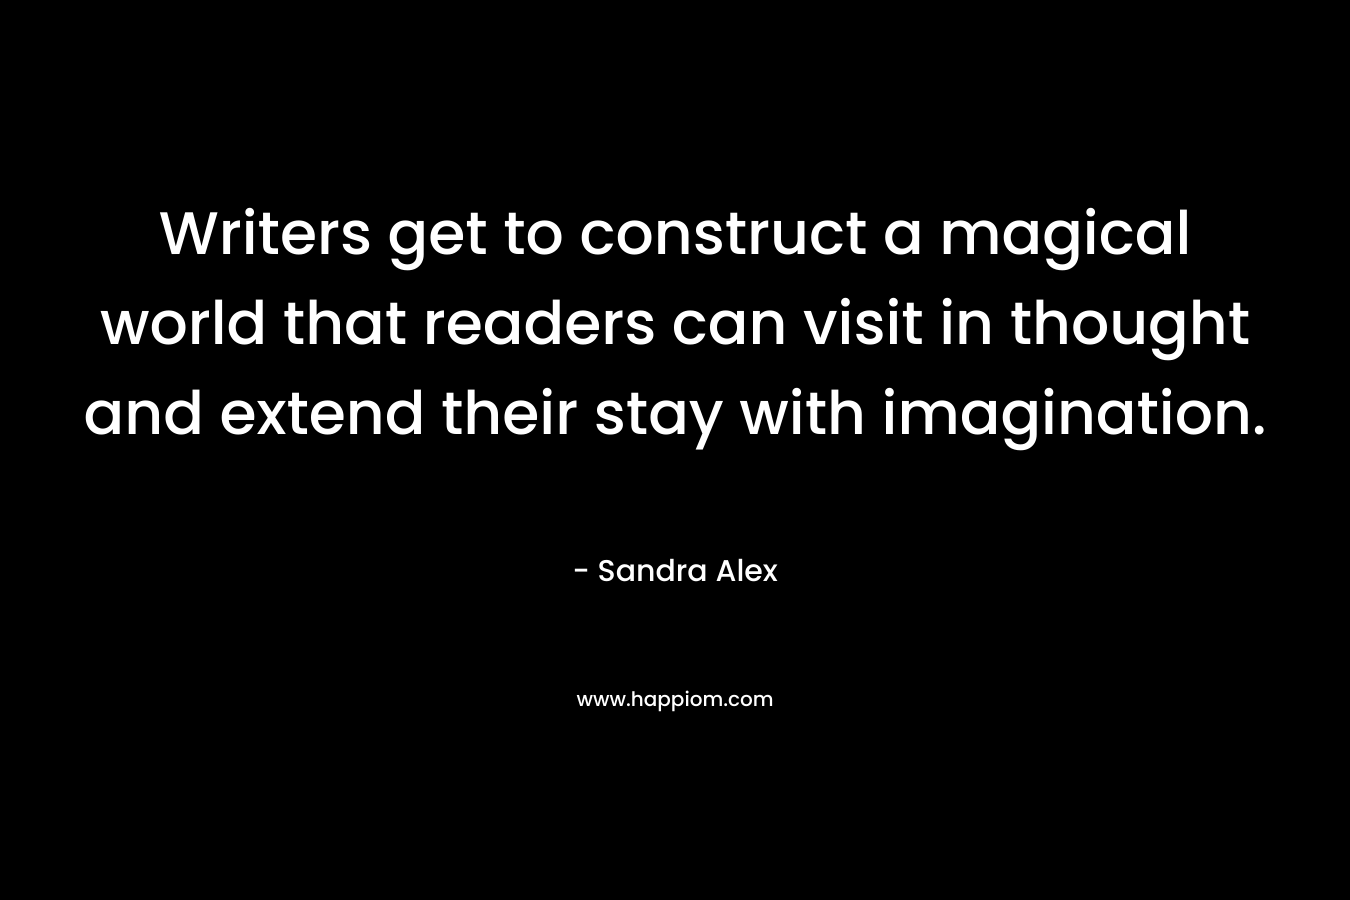 Writers get to construct a magical world that readers can visit in thought and extend their stay with imagination. – Sandra Alex